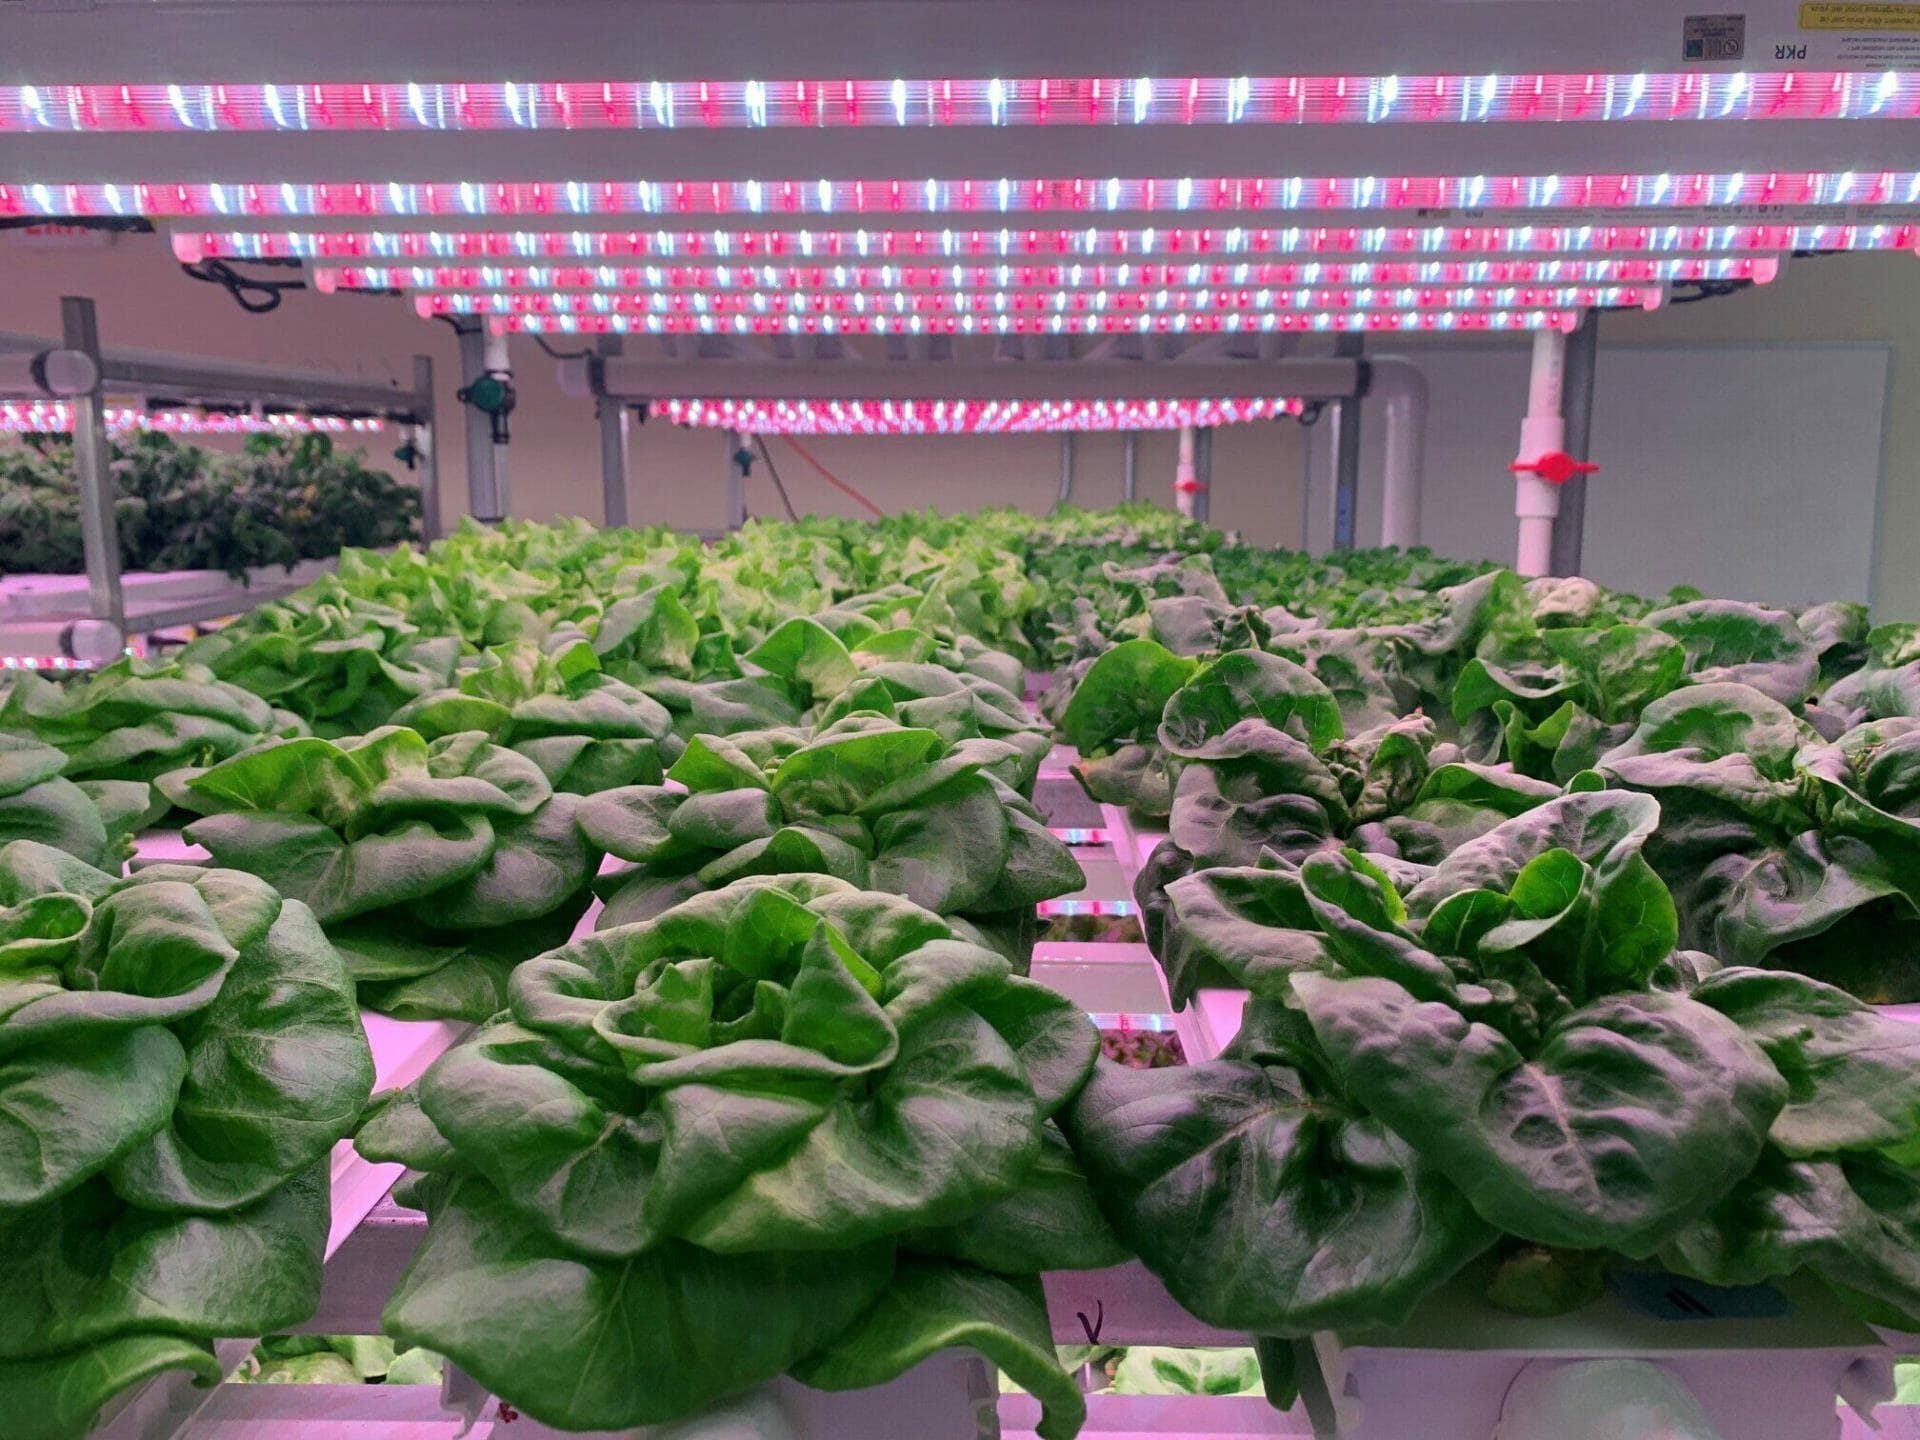 Lettuce inoculated with an endophyte grows under LED lights in the Virginia Tech-IALR Controlled Environment Agriculture Innovation Center